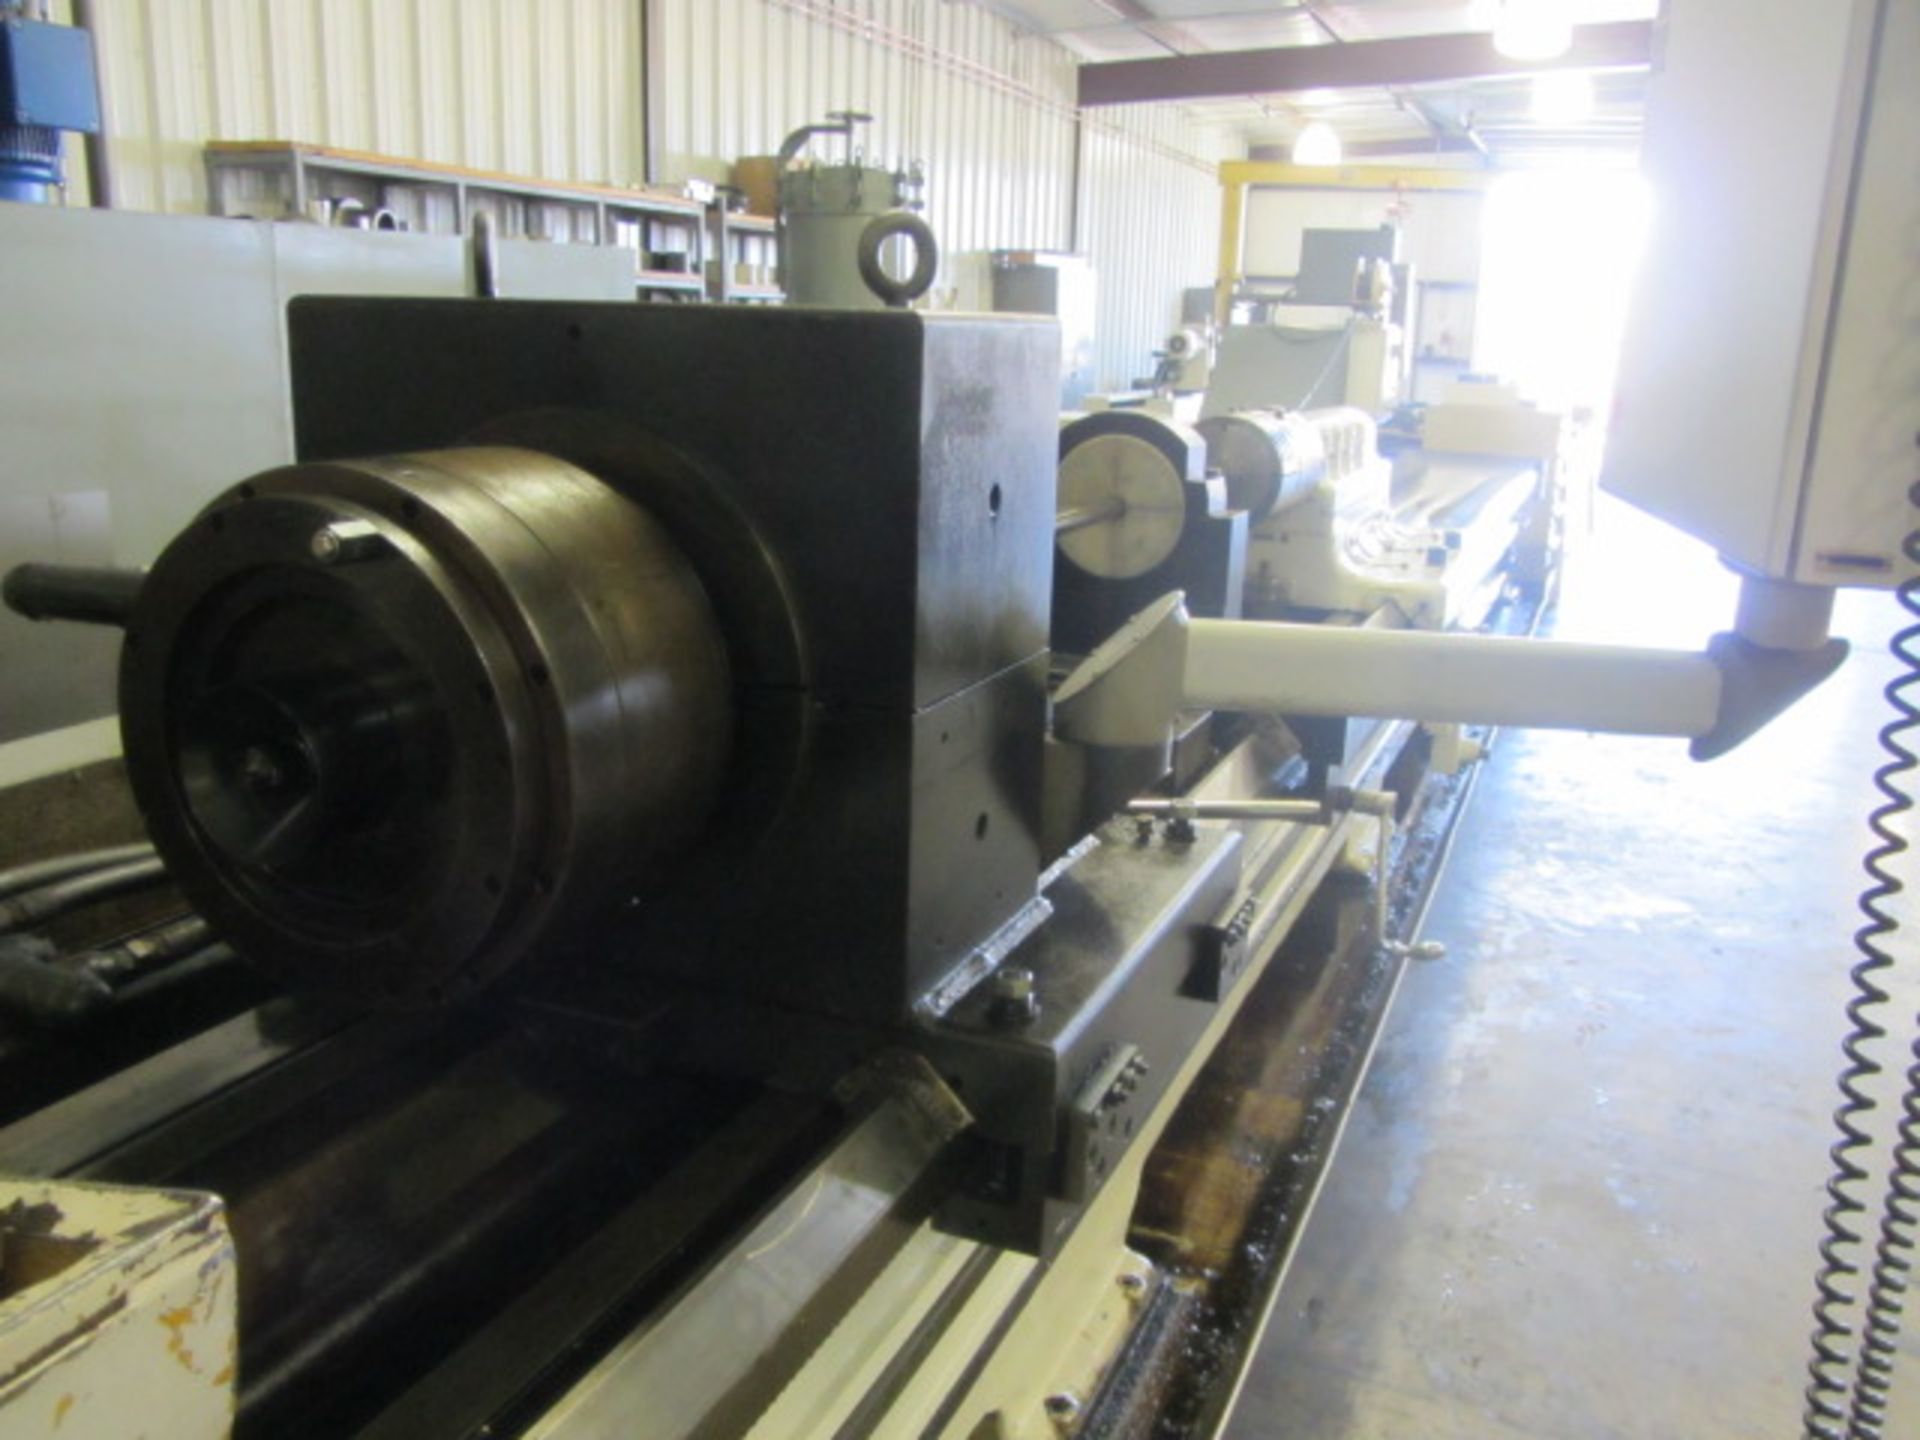 Sig/Axelson CNC Deep Hole / Trepanning / Ejector Drilling Machine with up to 27' Maximum Bed Length, - Image 3 of 10